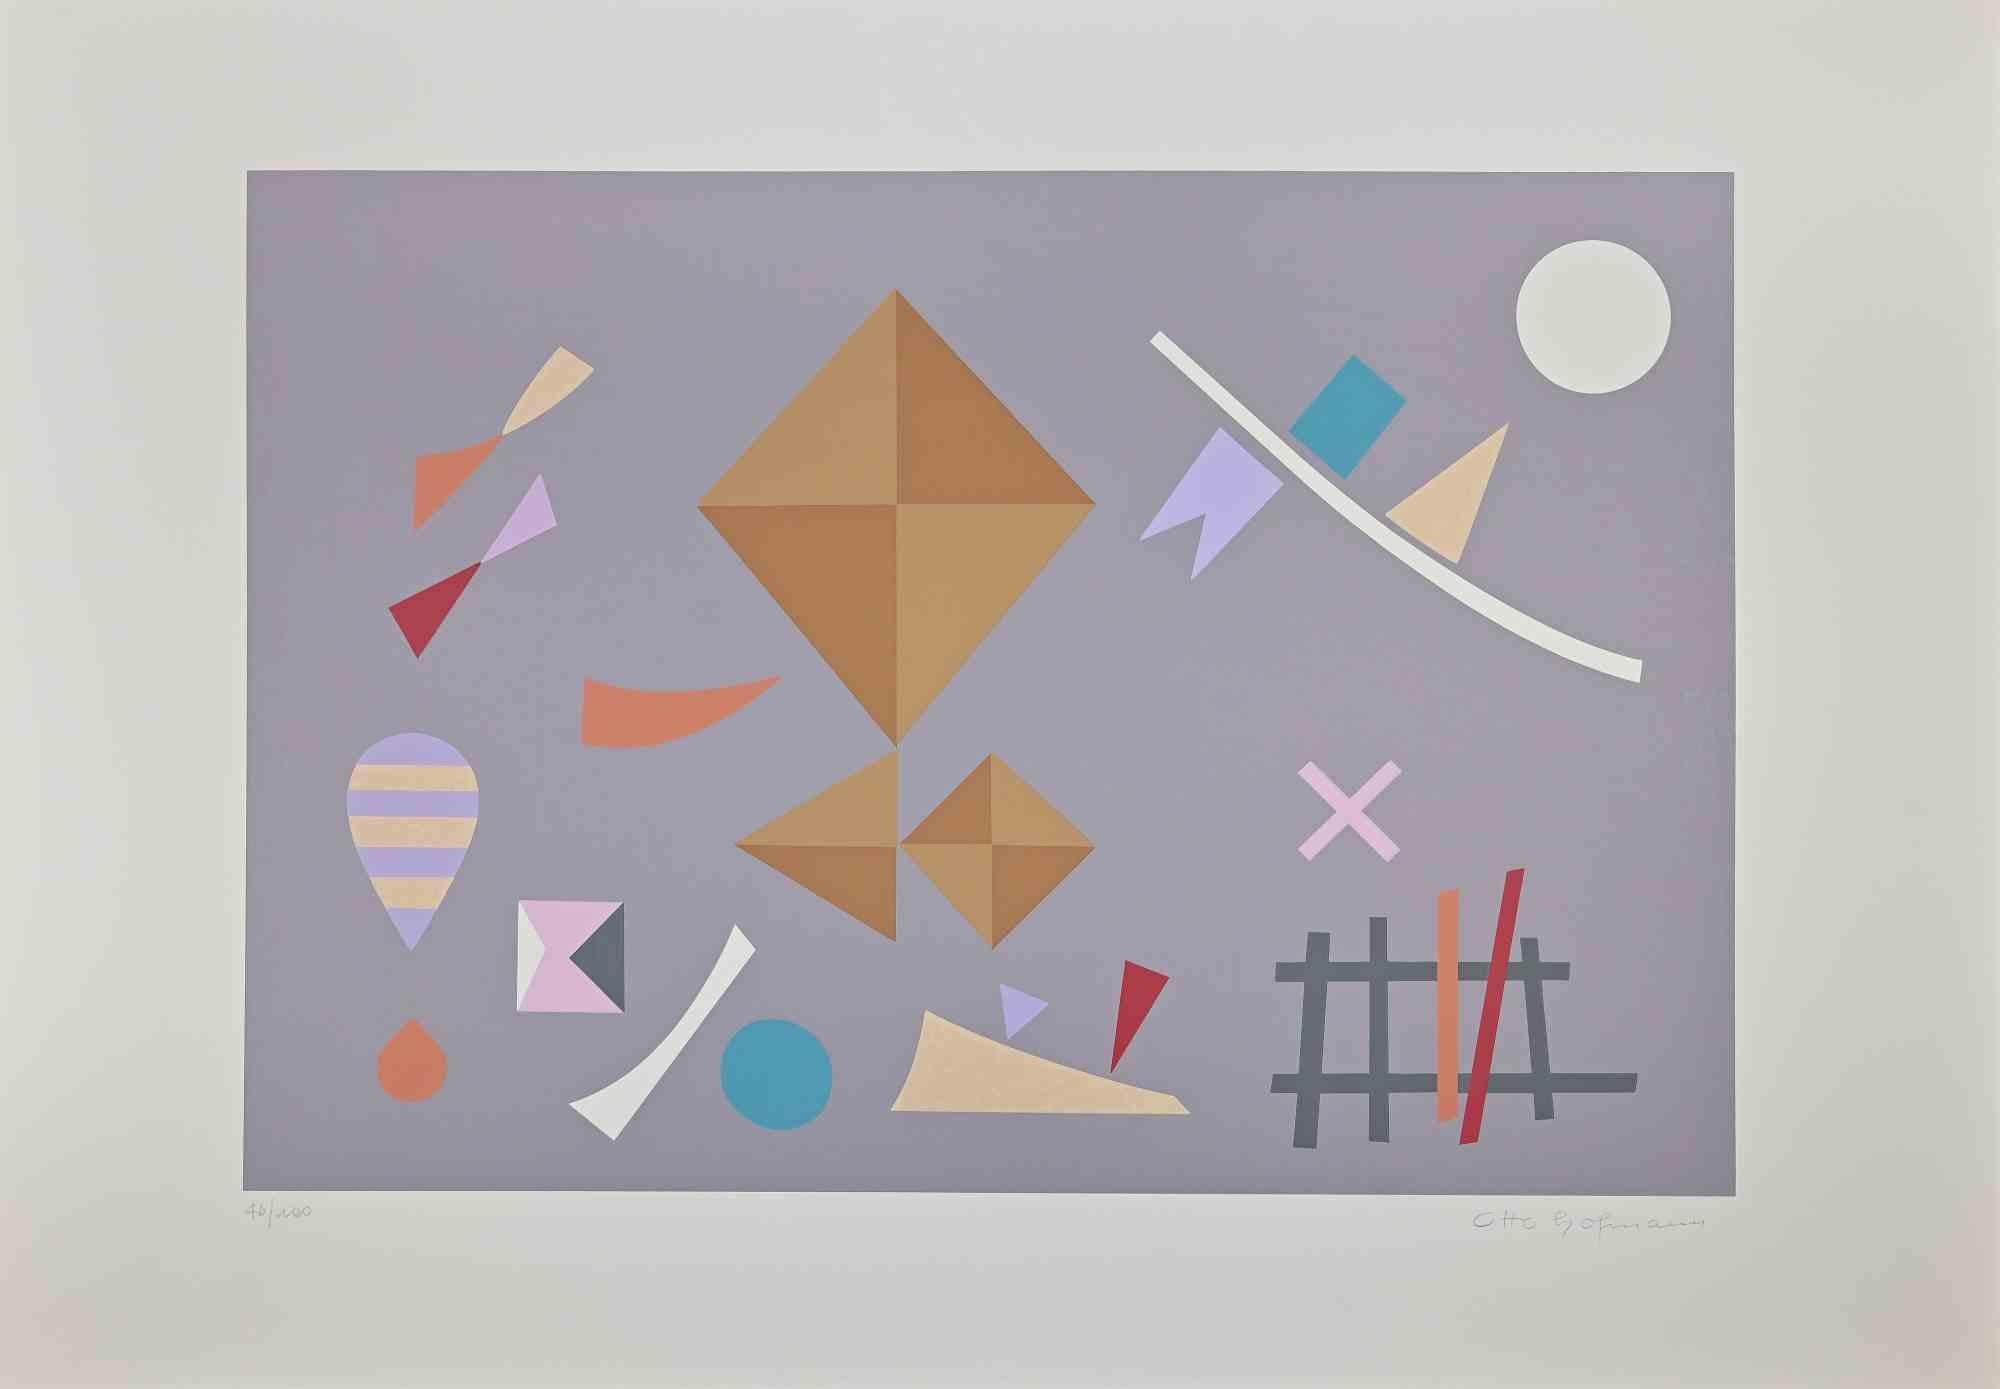 Grey composition is an original contemporary artwork realizedby Otto Hofmann in 1989.

Mixed colored screen print.

Hand signed on the lower right margin.

Numbered on the lower left. Edition of 46/100.

The artwork is from a potfolio edited by